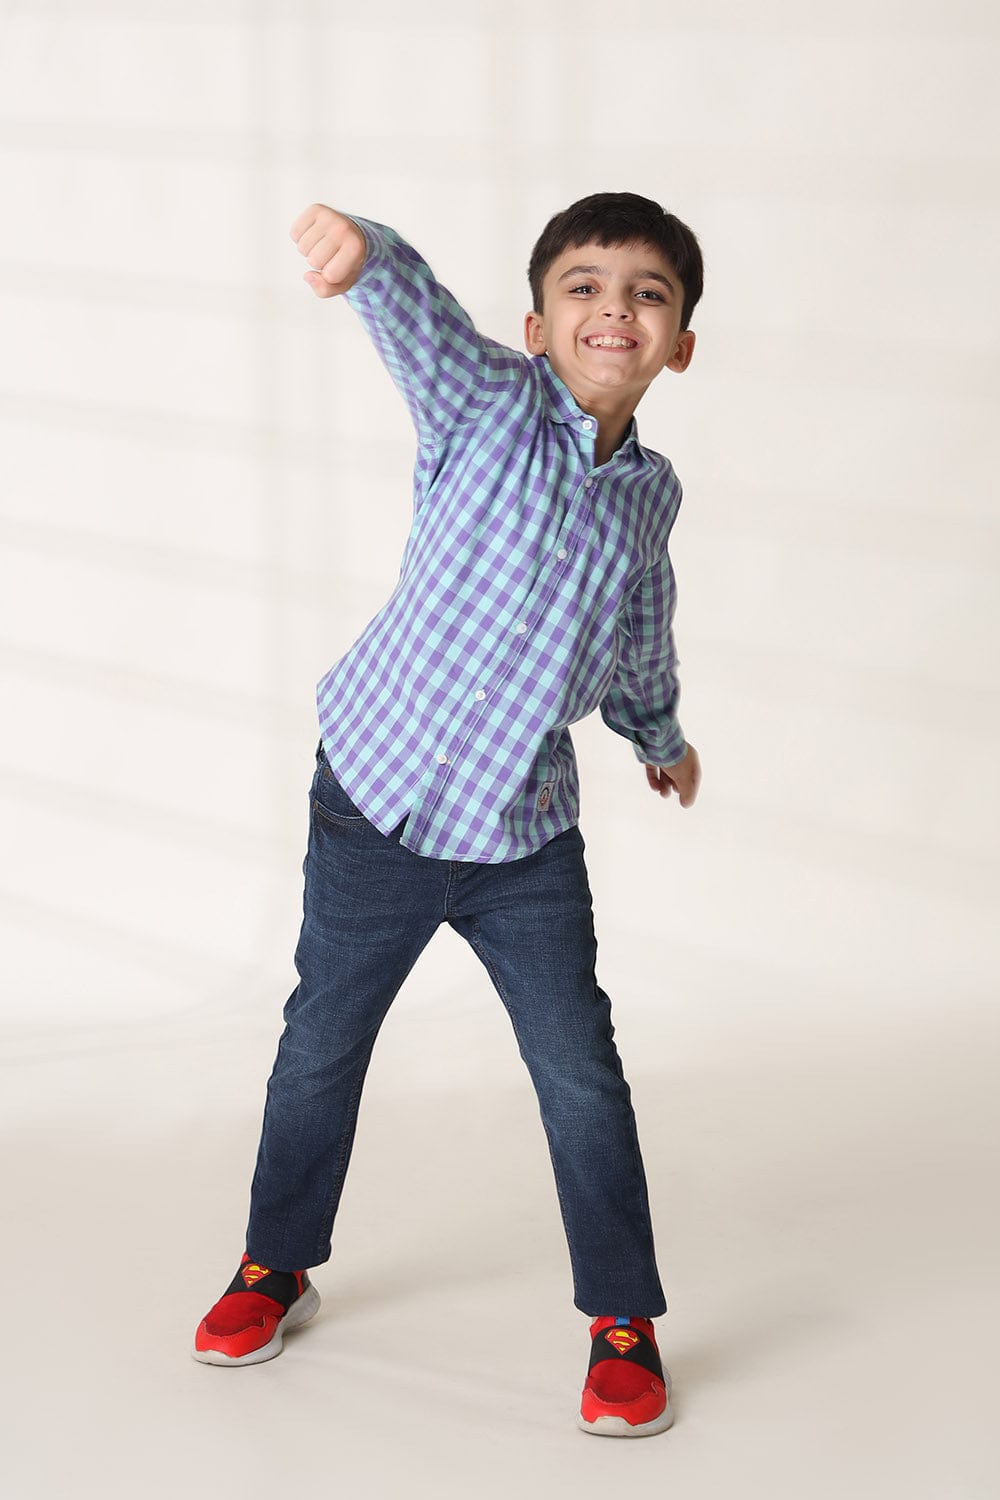 Hope Not Out by Shahid Afridi Boys Casual Shirt Boys Purple Derby Check Casual Shirt